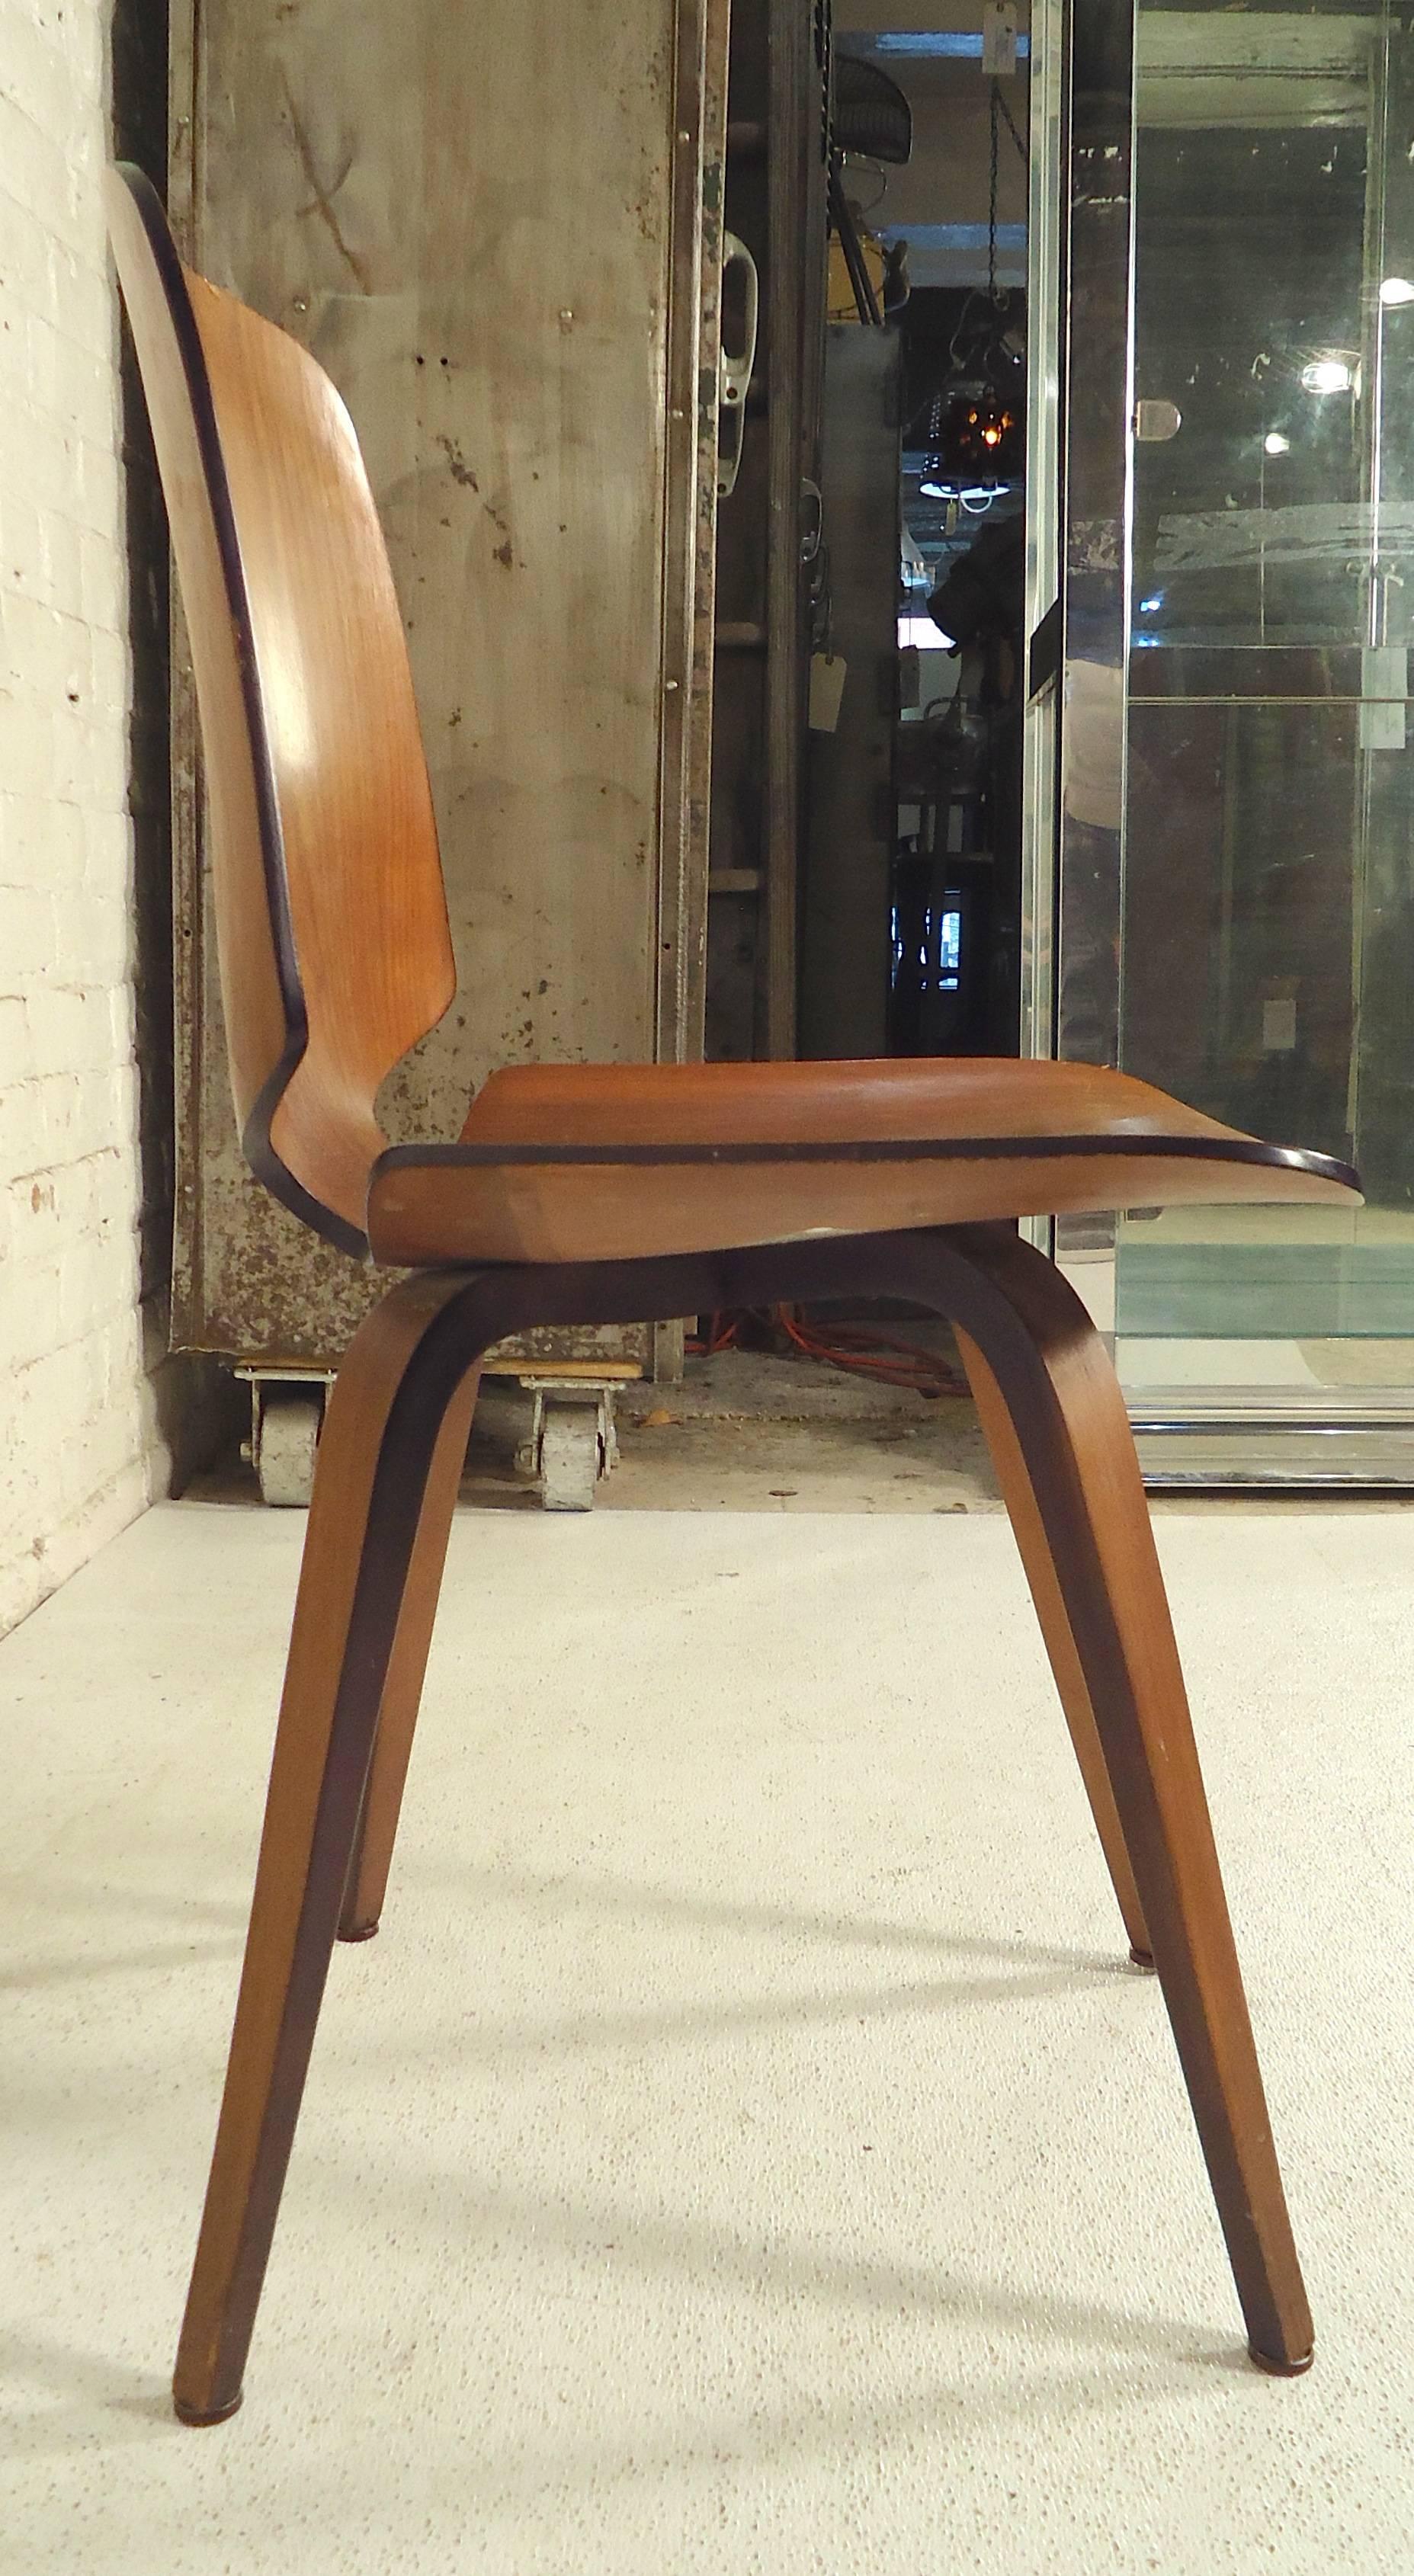 Iconic mid-century modern bentwood side chair designed by George Mulhauser for Plycraft of Massachusetts. Both original labels still intact, revealing an original manufacture date of April 12, 1965. Charming desk chair or a wonderful accent piece